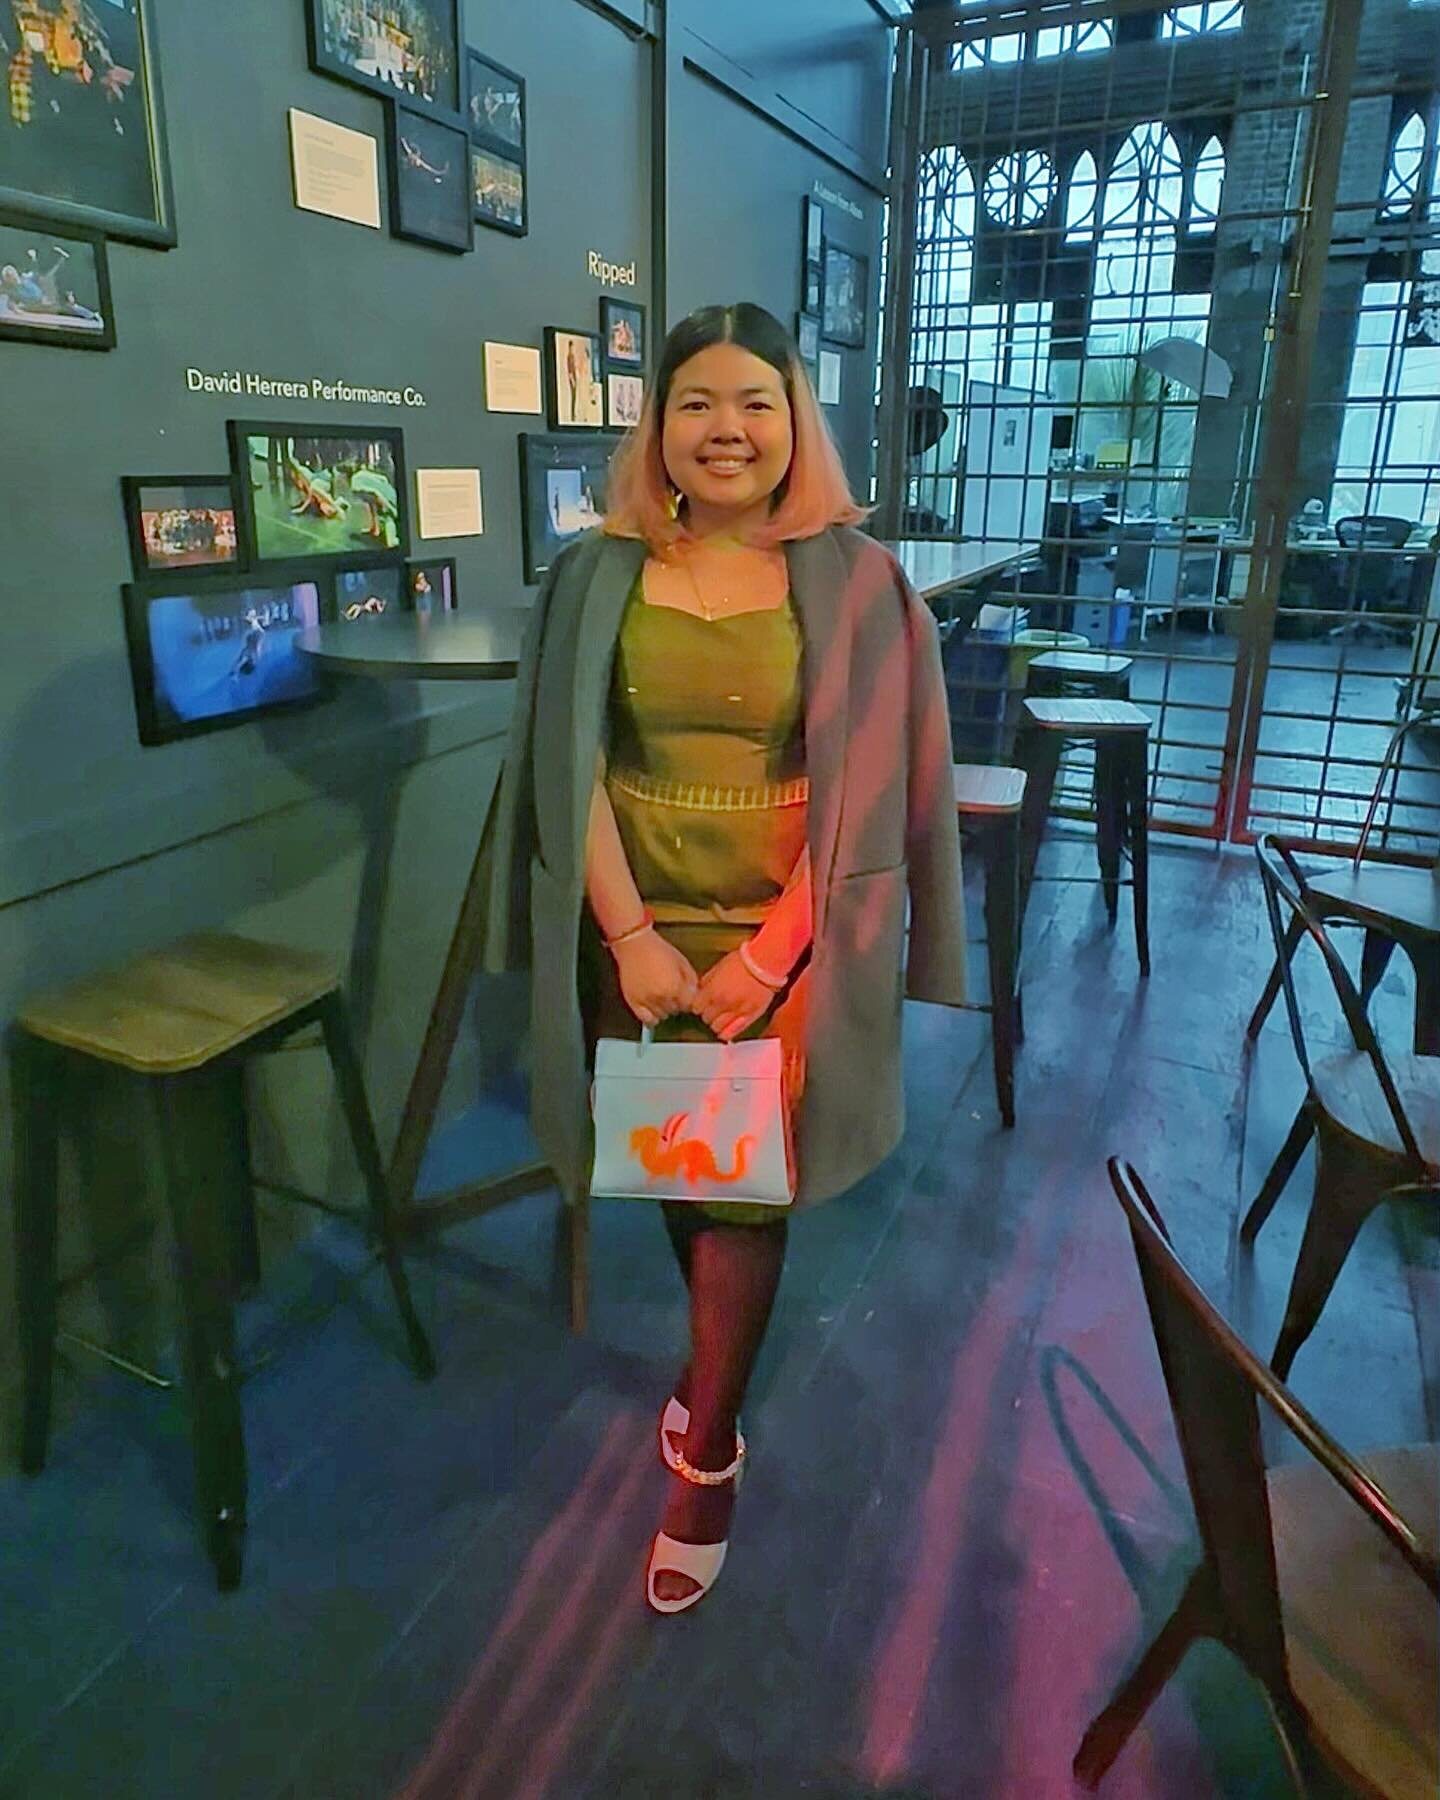 Happy International Women&rsquo;s Day! 

Meet Krystal M. Chuon, a 2nd generation indigenous Khmer/Krom American artist, writer, and maker. She has a passion for art and literature which blossomed during her upbringing in San Francisco. 

She&rsquo;s 